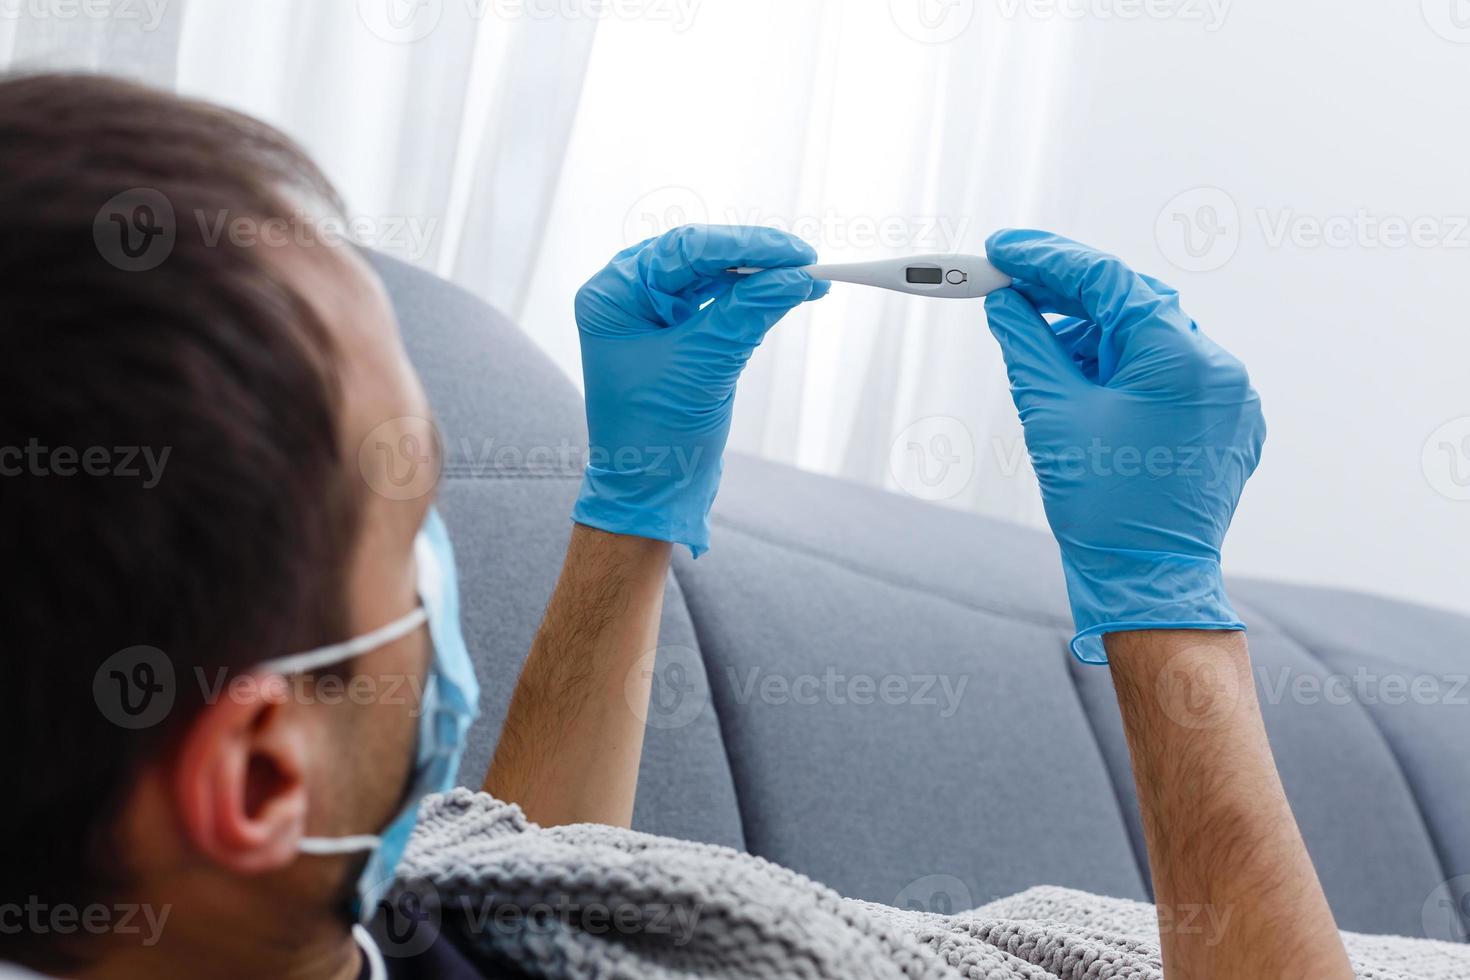 Protection against contagious disease, coronavirus. Man wearing hygienic mask to prevent infection, airborne respiratory illness such as flu, 2019-nCoV photo